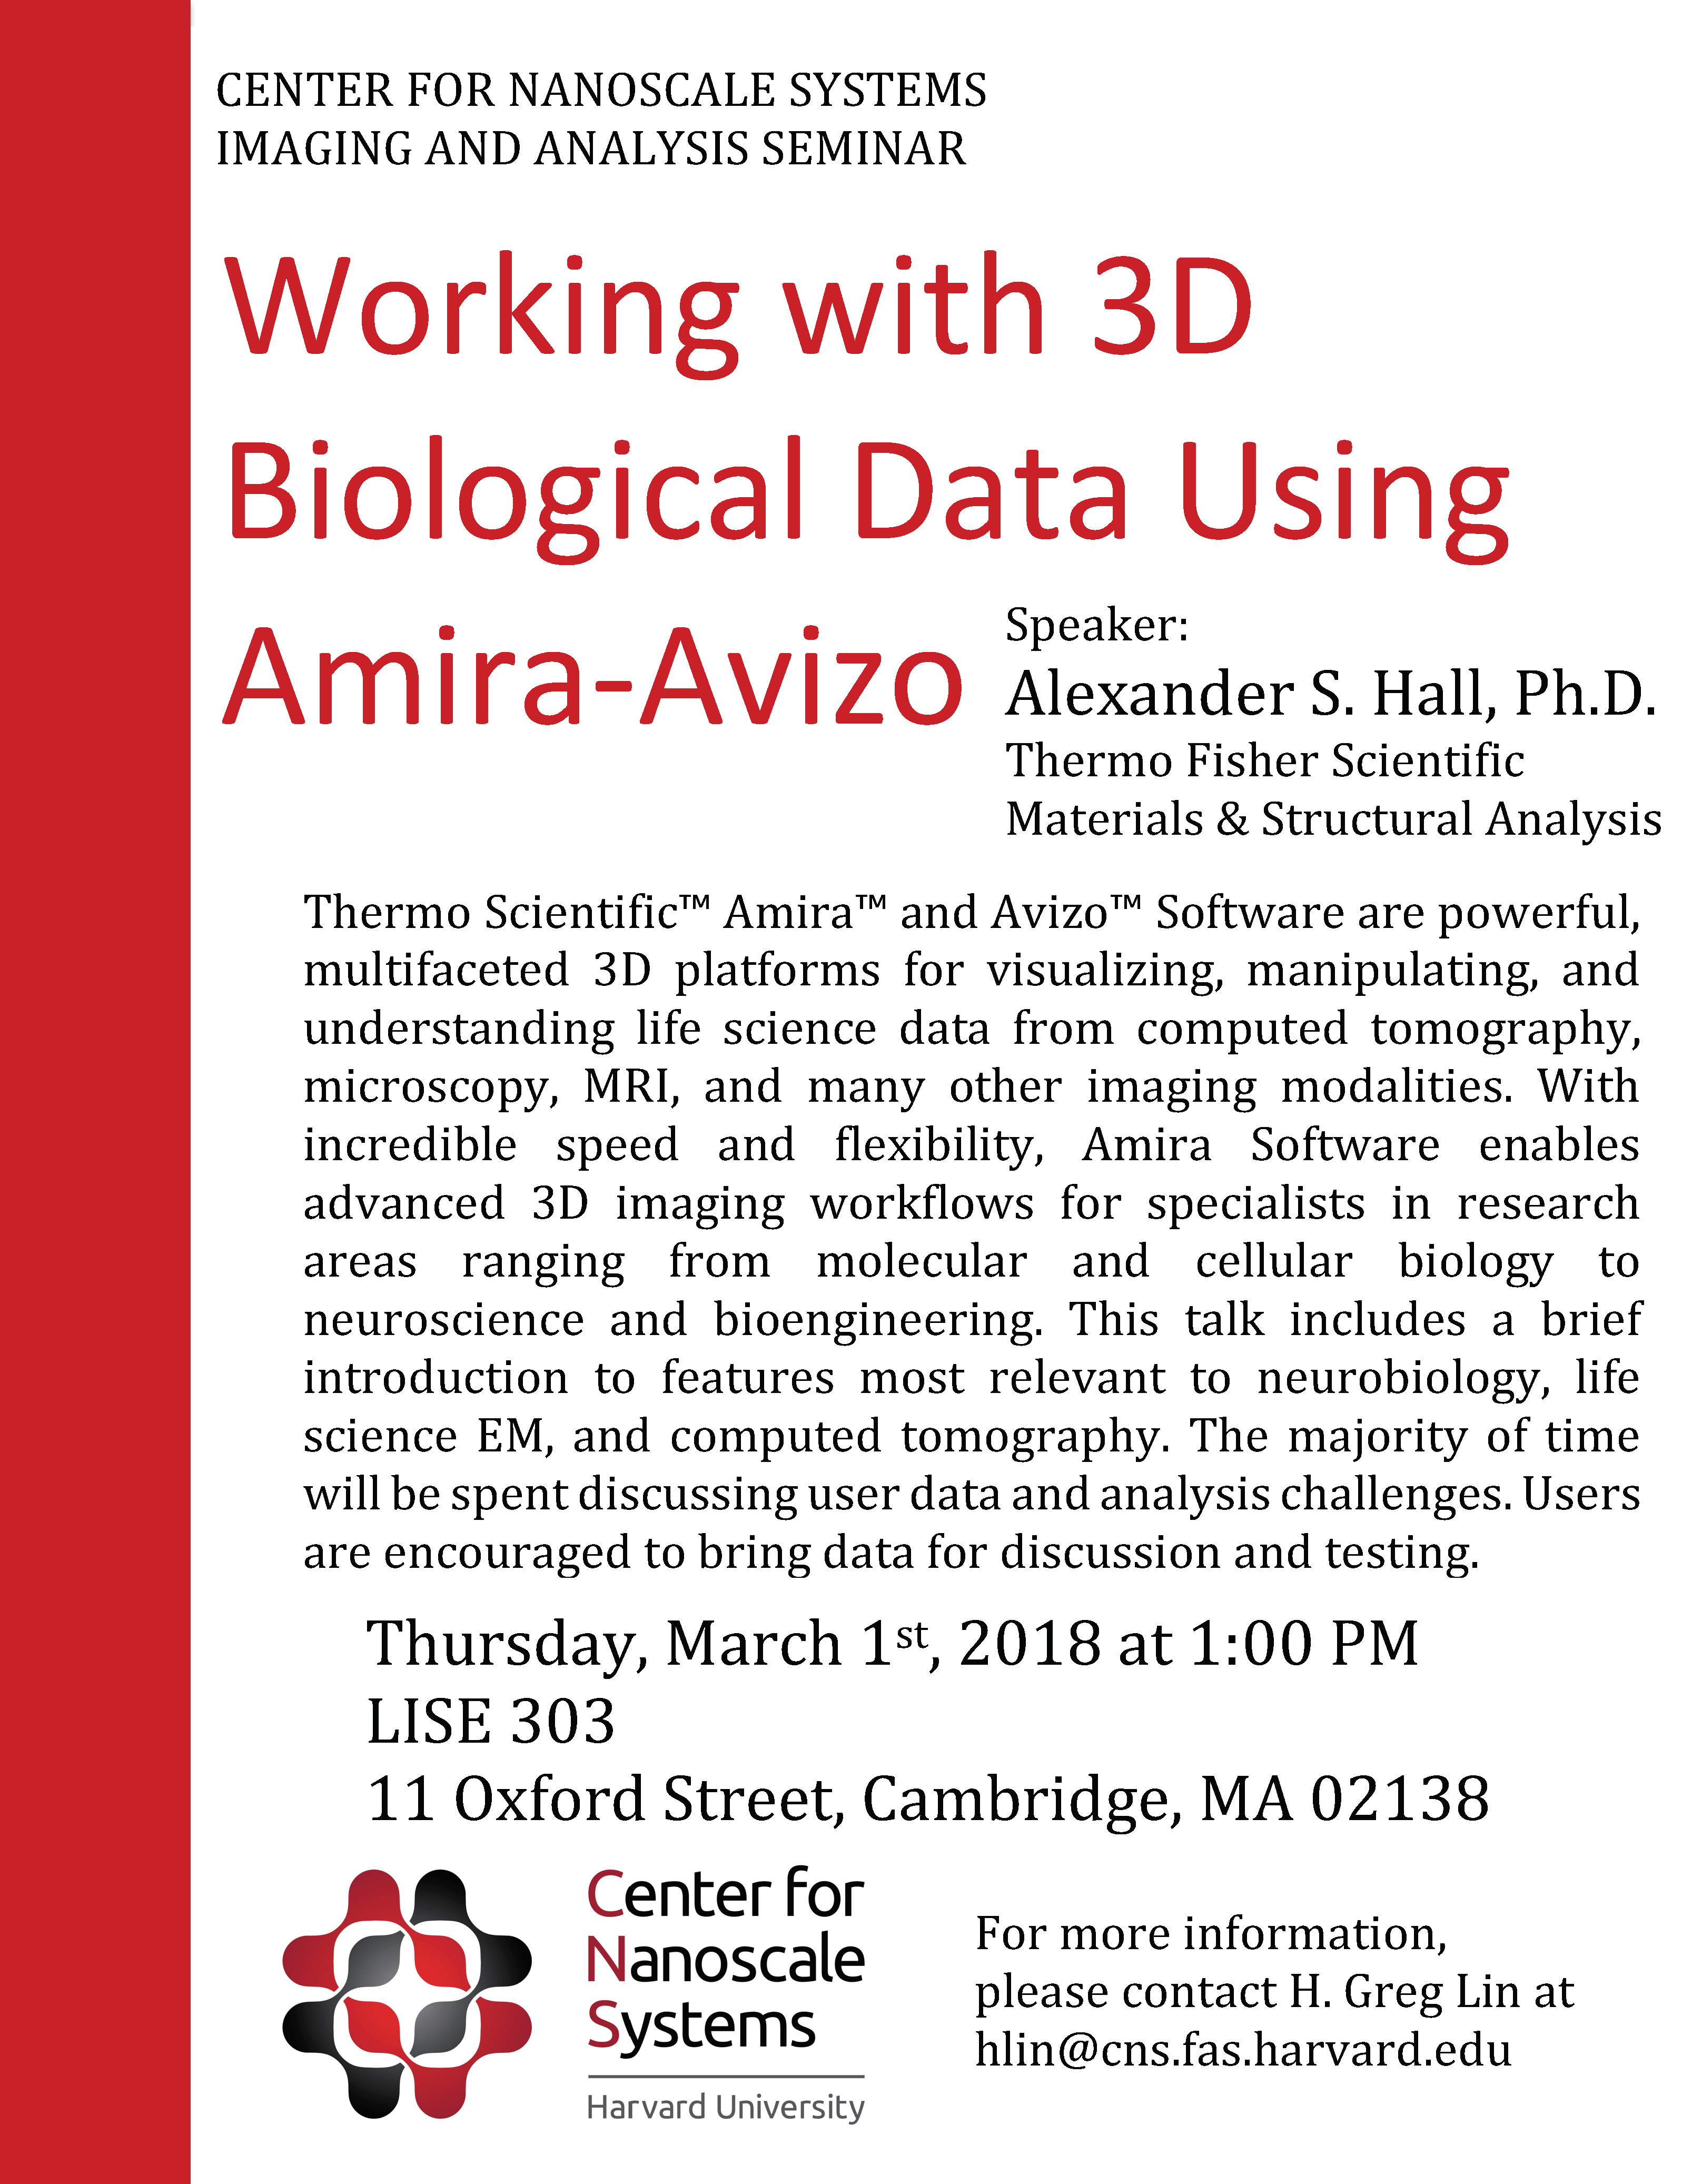 Working with 3D Biological Data Using Amira-Avizo Speech by Alexander S. Hall Flyer